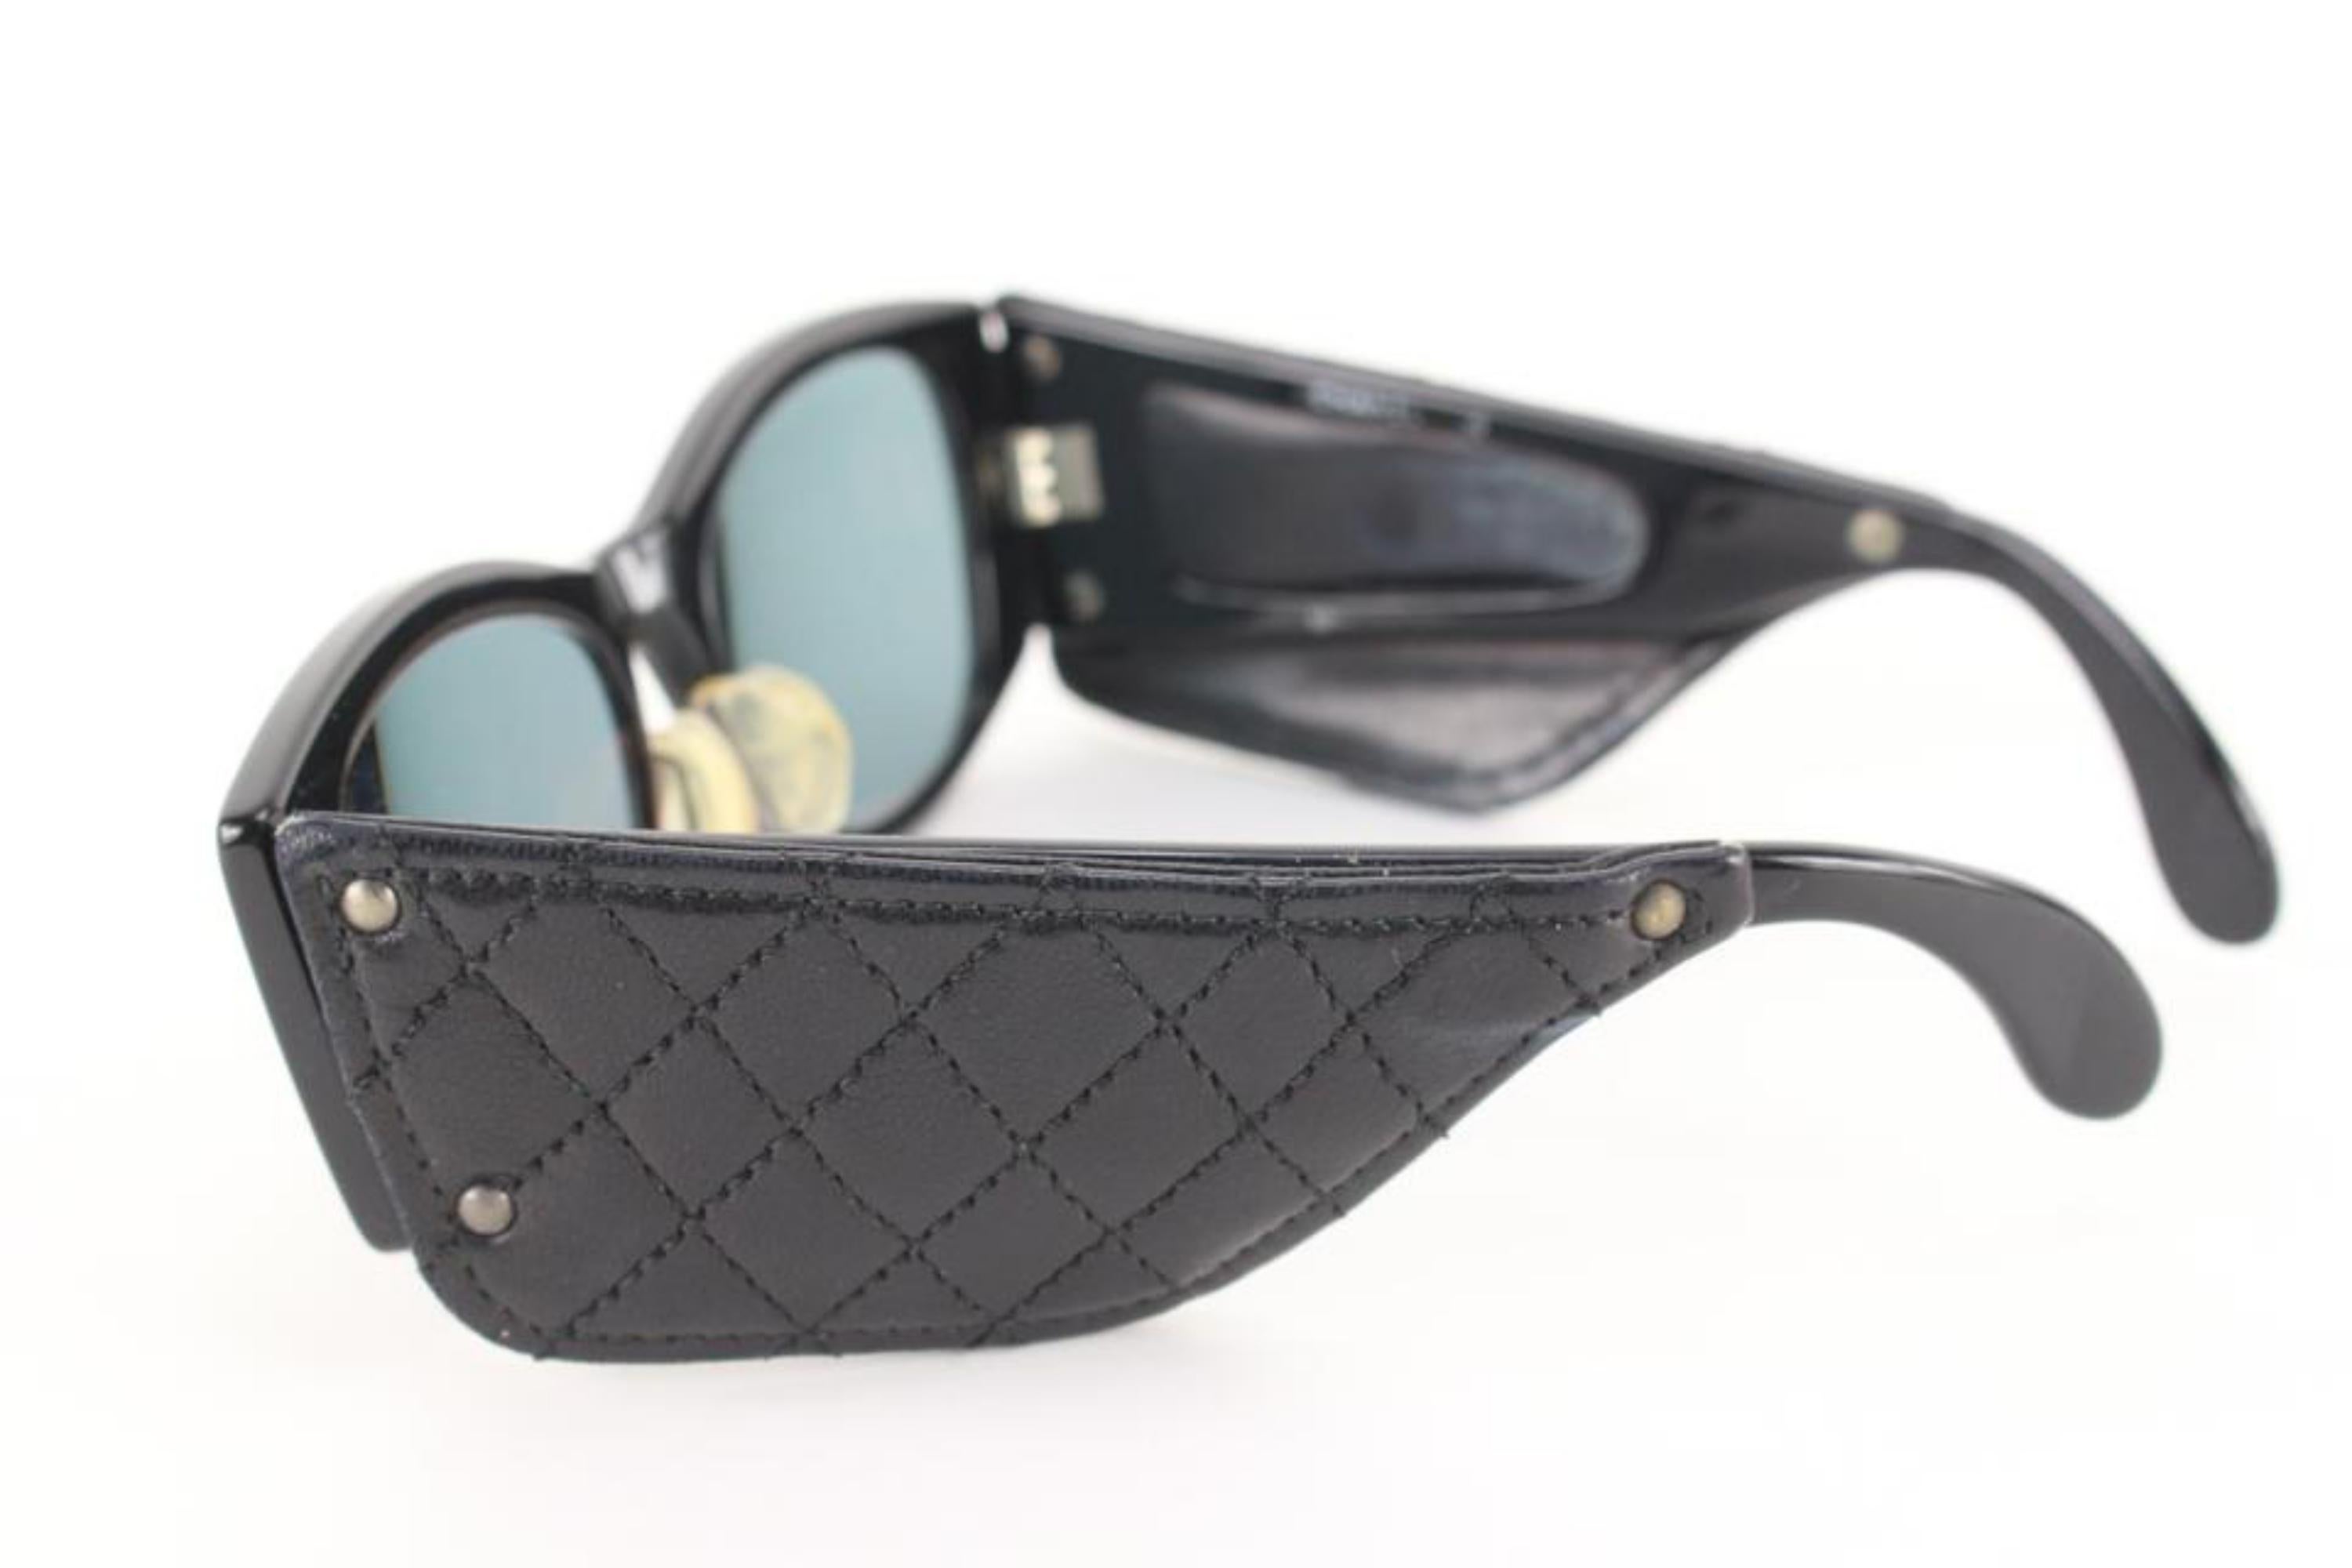 Chanel Rare Vintage Black Quilted Lambskin 1988 Sunglasses 1cz822s 6